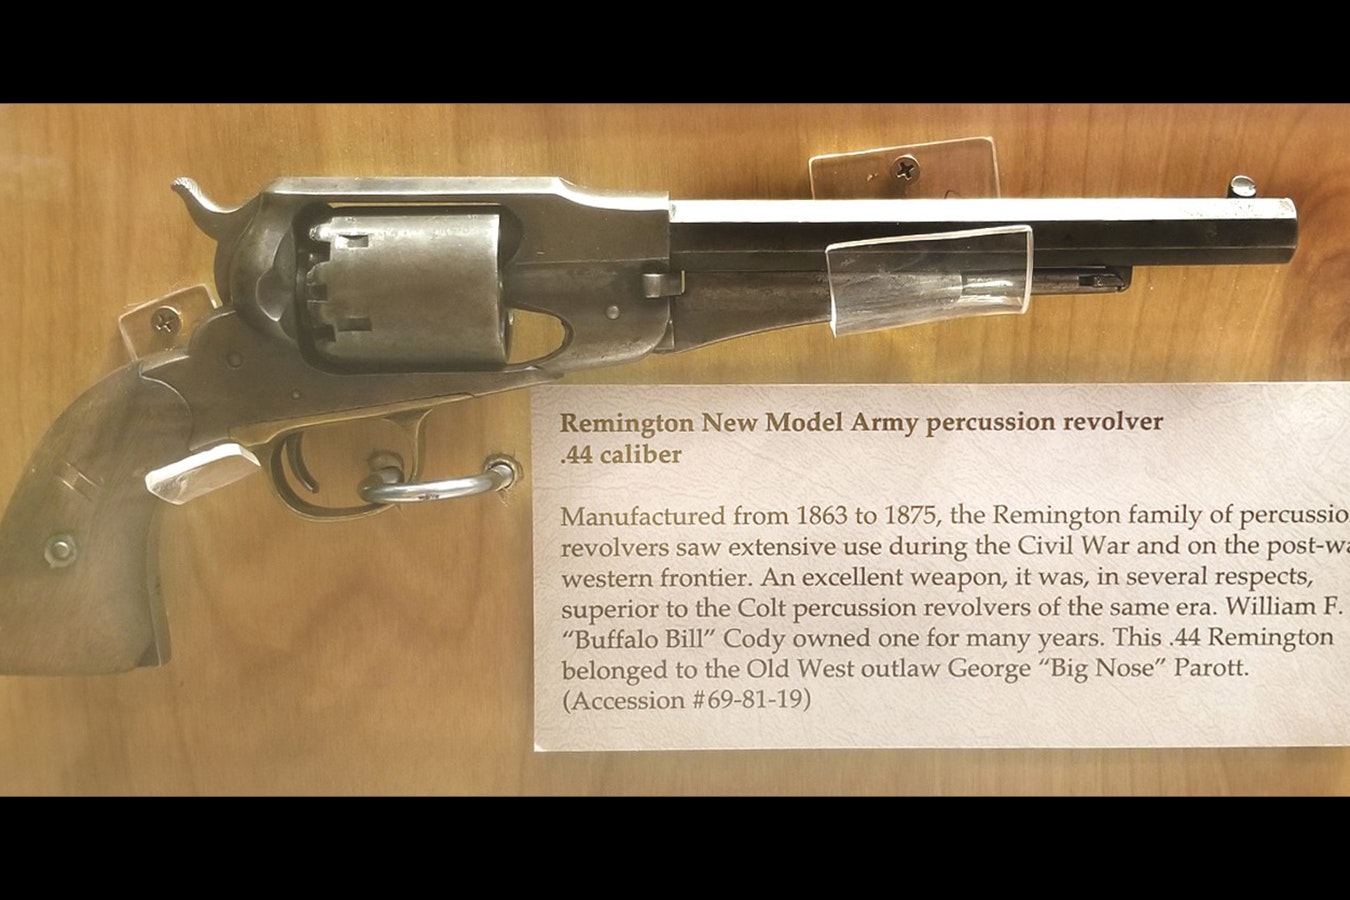 This gun reported to have belonged to notorious outlaw "Big Nose" George Parrott was recently discovered after spending decades in storage at the Sweetwater County Historical Museum.